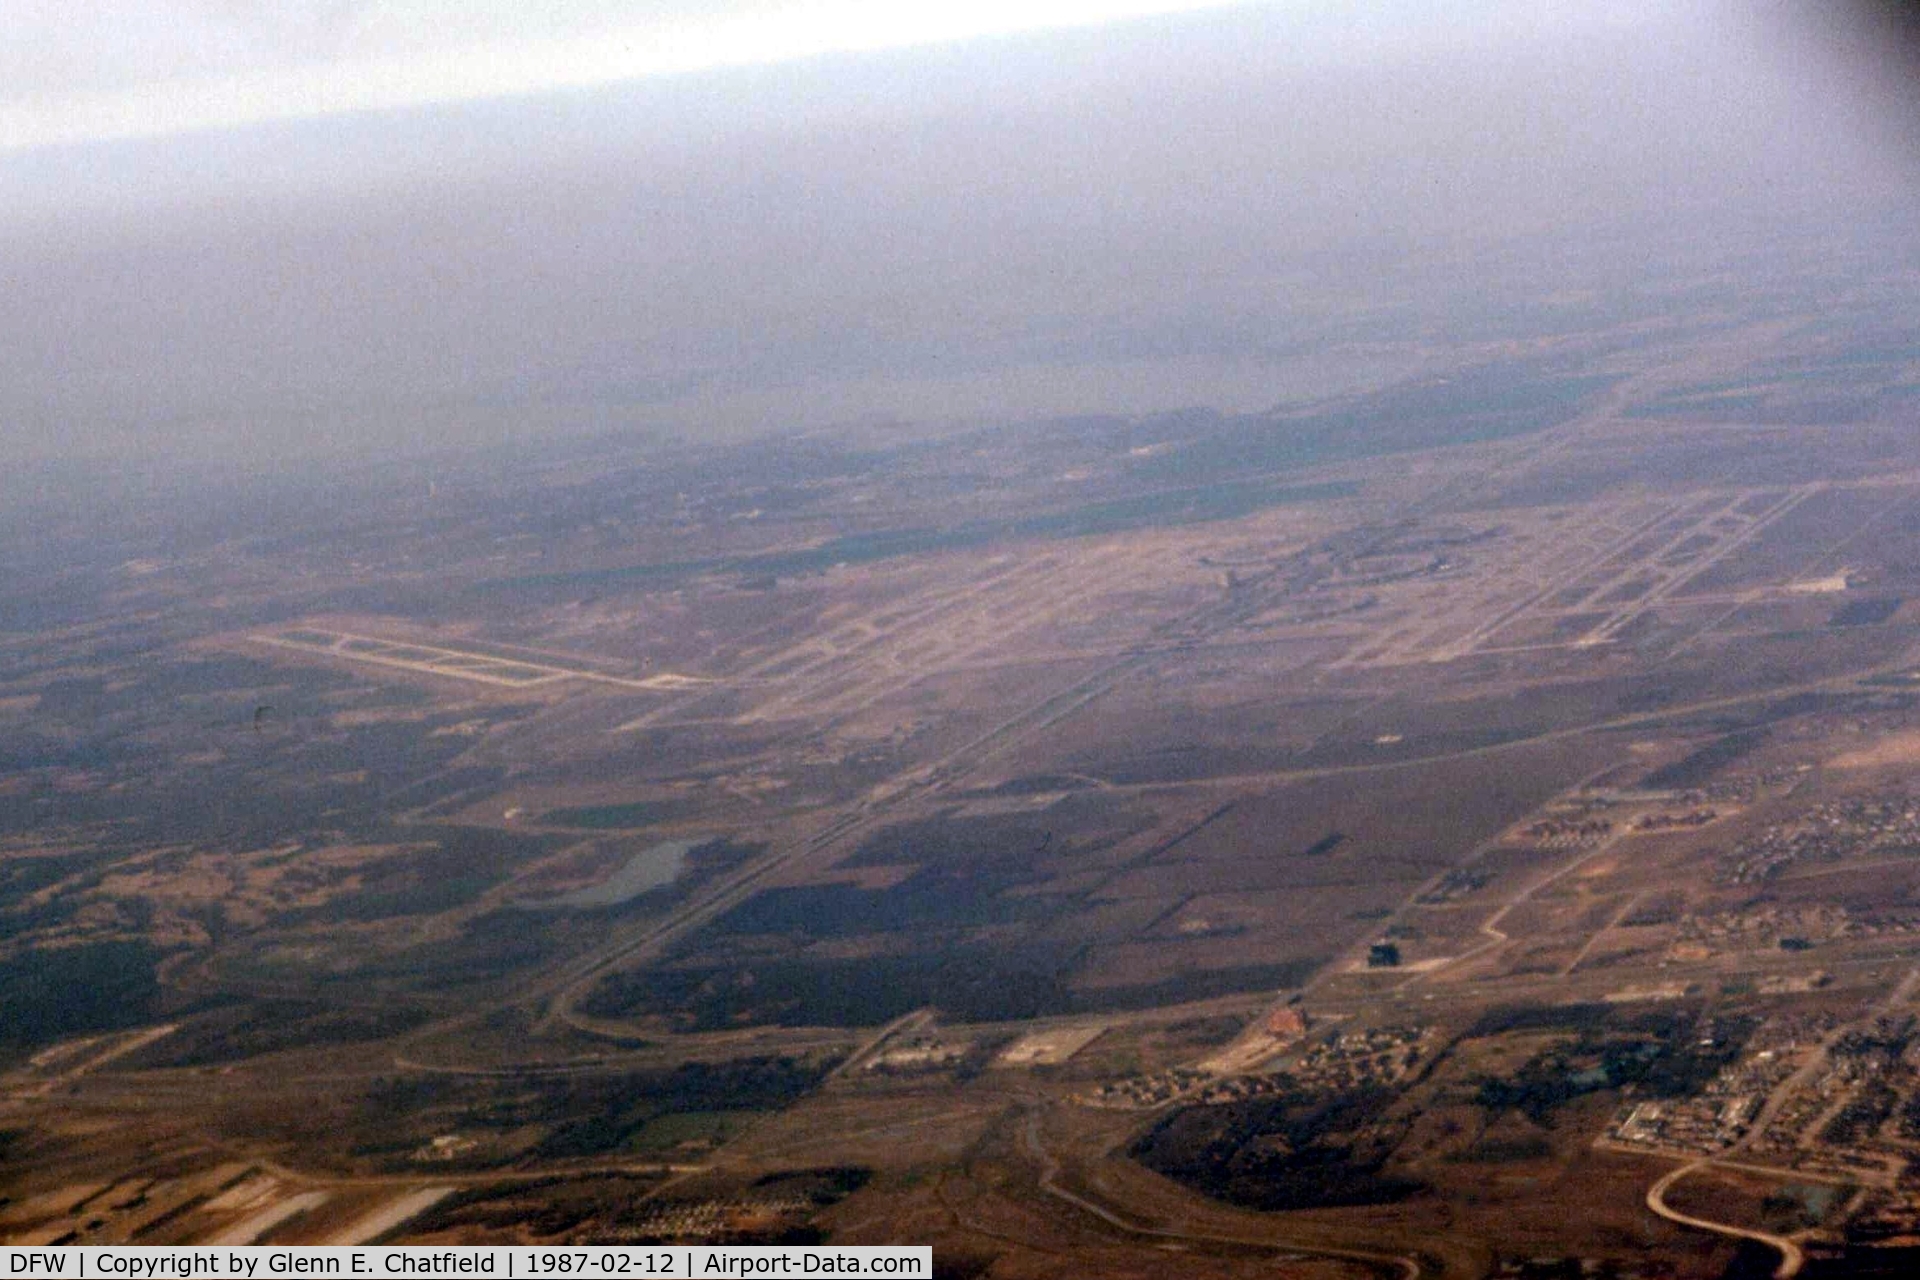 Dallas/fort Worth International Airport (DFW) - View from a DC9 enroute DFW to ORD